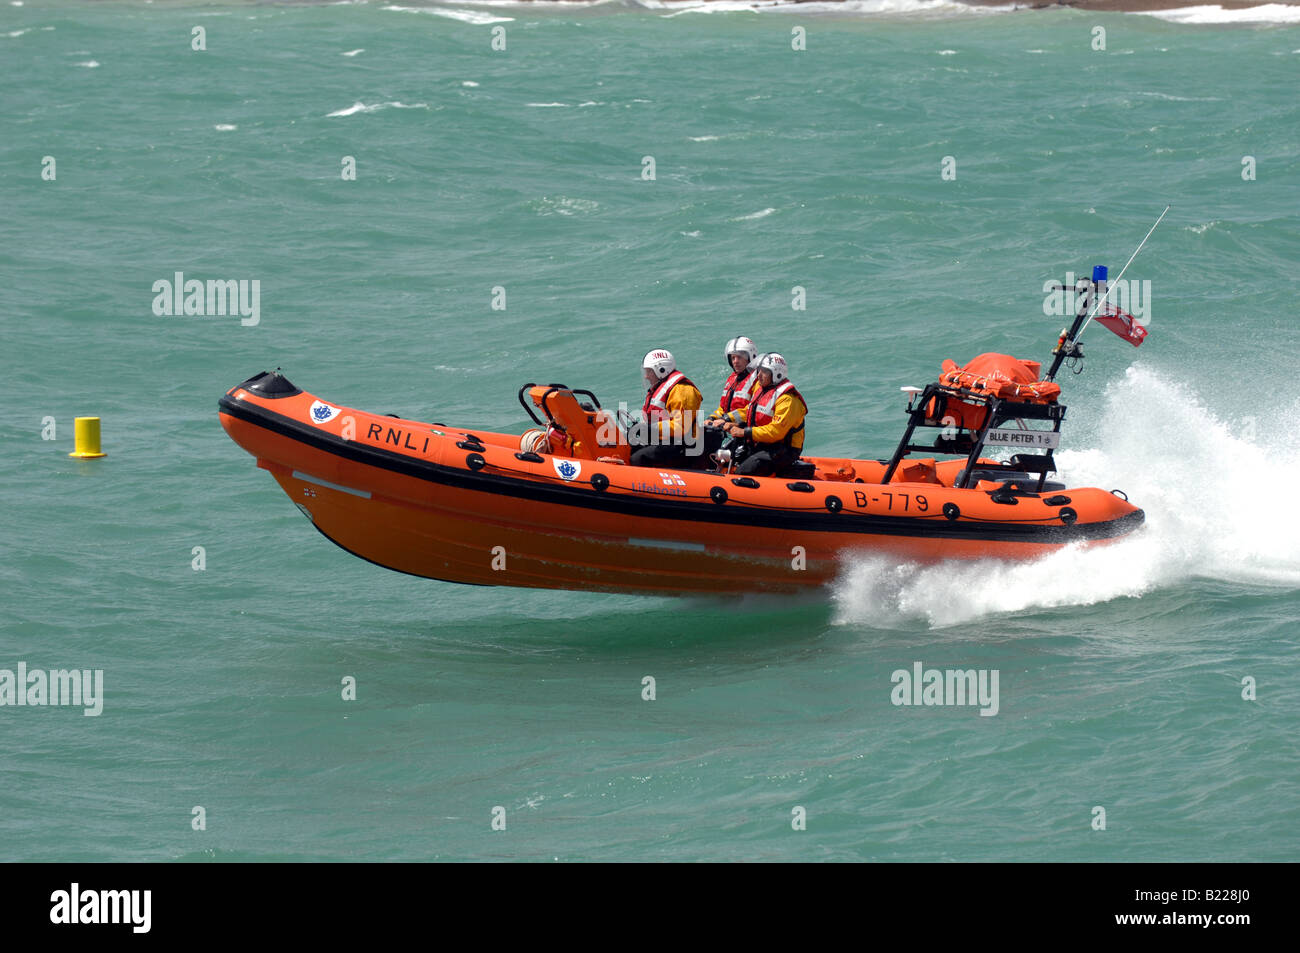 The RNLI inshore lifeboat named Blue Peter 1 in action off Worthing seafront UK Stock Photo